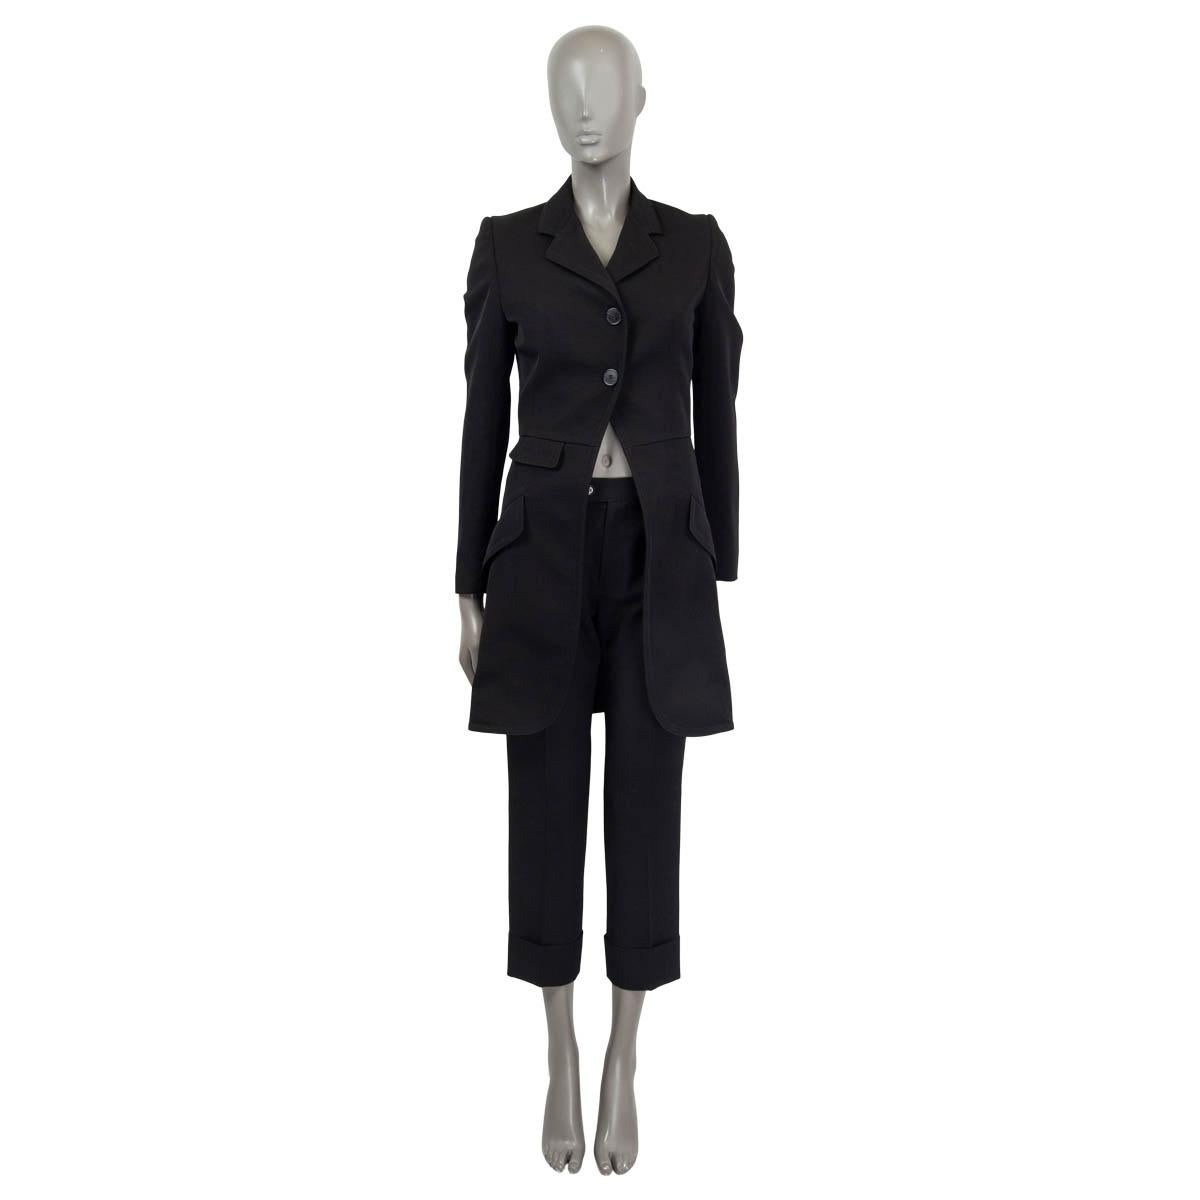 100% authentic Alexander McQueen redingote coat in black wool and viscose (assumed cause tag is missing). Features buttoned cuffs, padded shoulders and three sewn shut flap pockets on the front. Opens with two buttons on the front. Lined in black